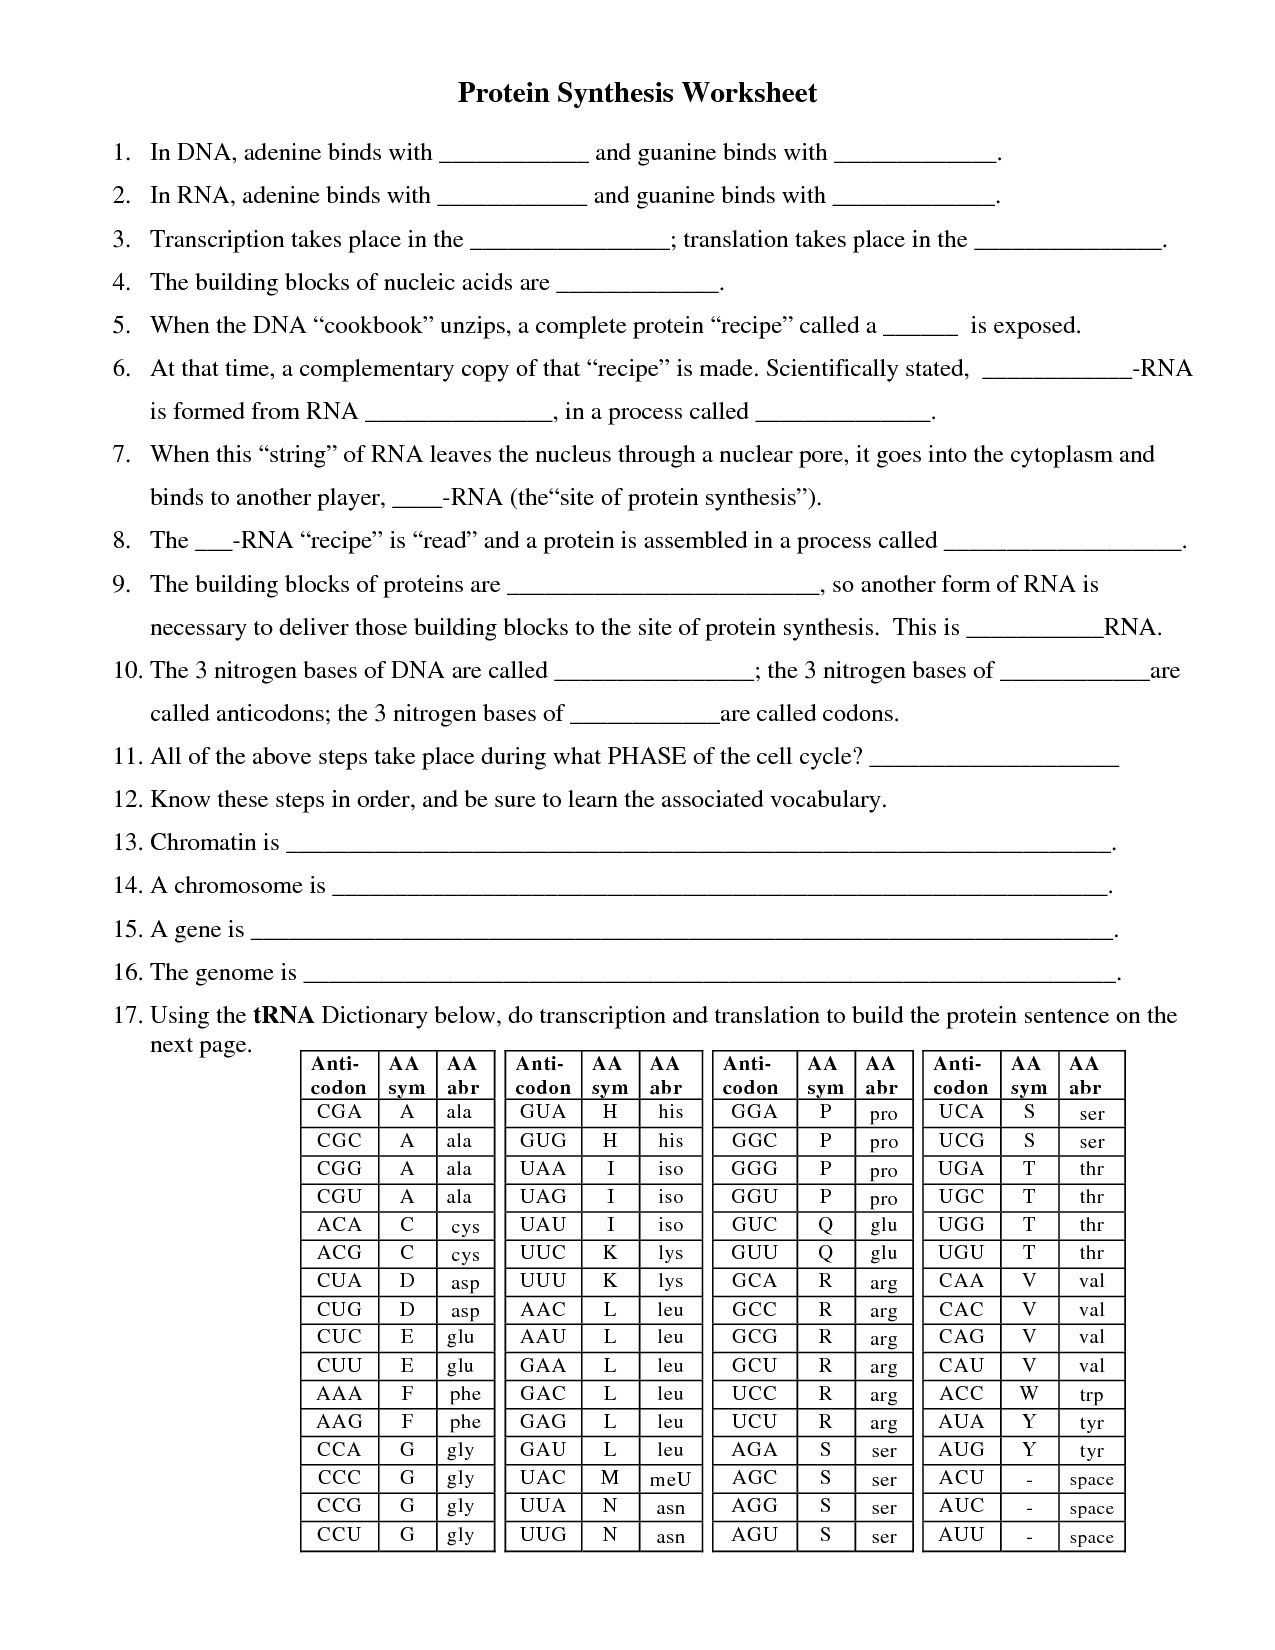 Mutations Worksheet Answer Key Prime Dna and Protein Synthesis Worksheet Answers